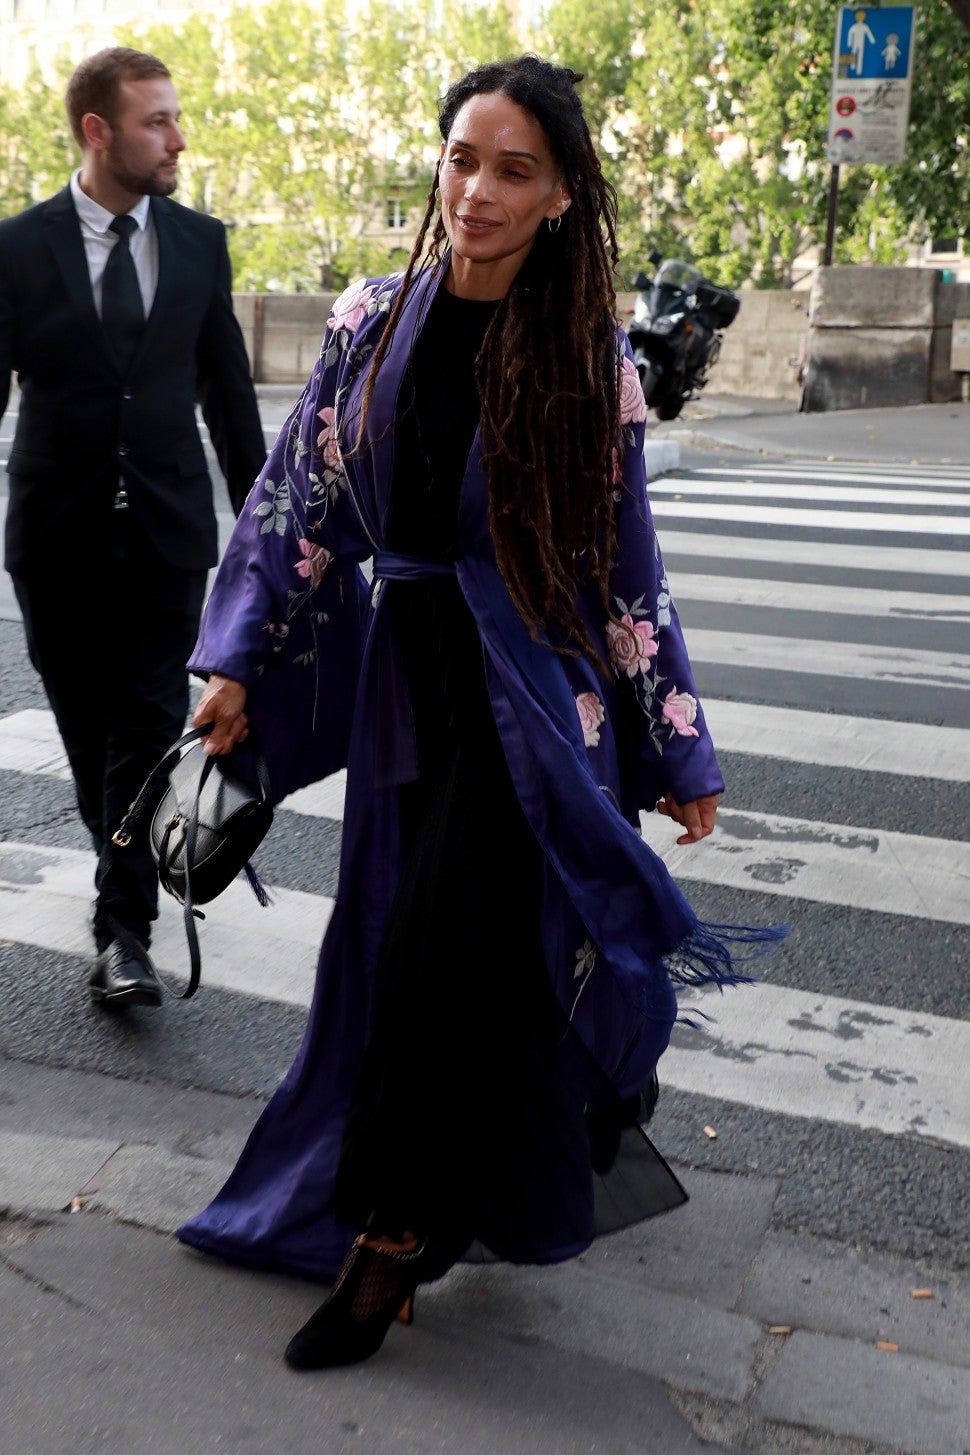 Lisa Bonet arrives at at 'La Perouse' restaurant where a dinner is given to celebrate Zoe Kravitz and Karl Glusman's wedding on June 28, 2019 in Paris, France.